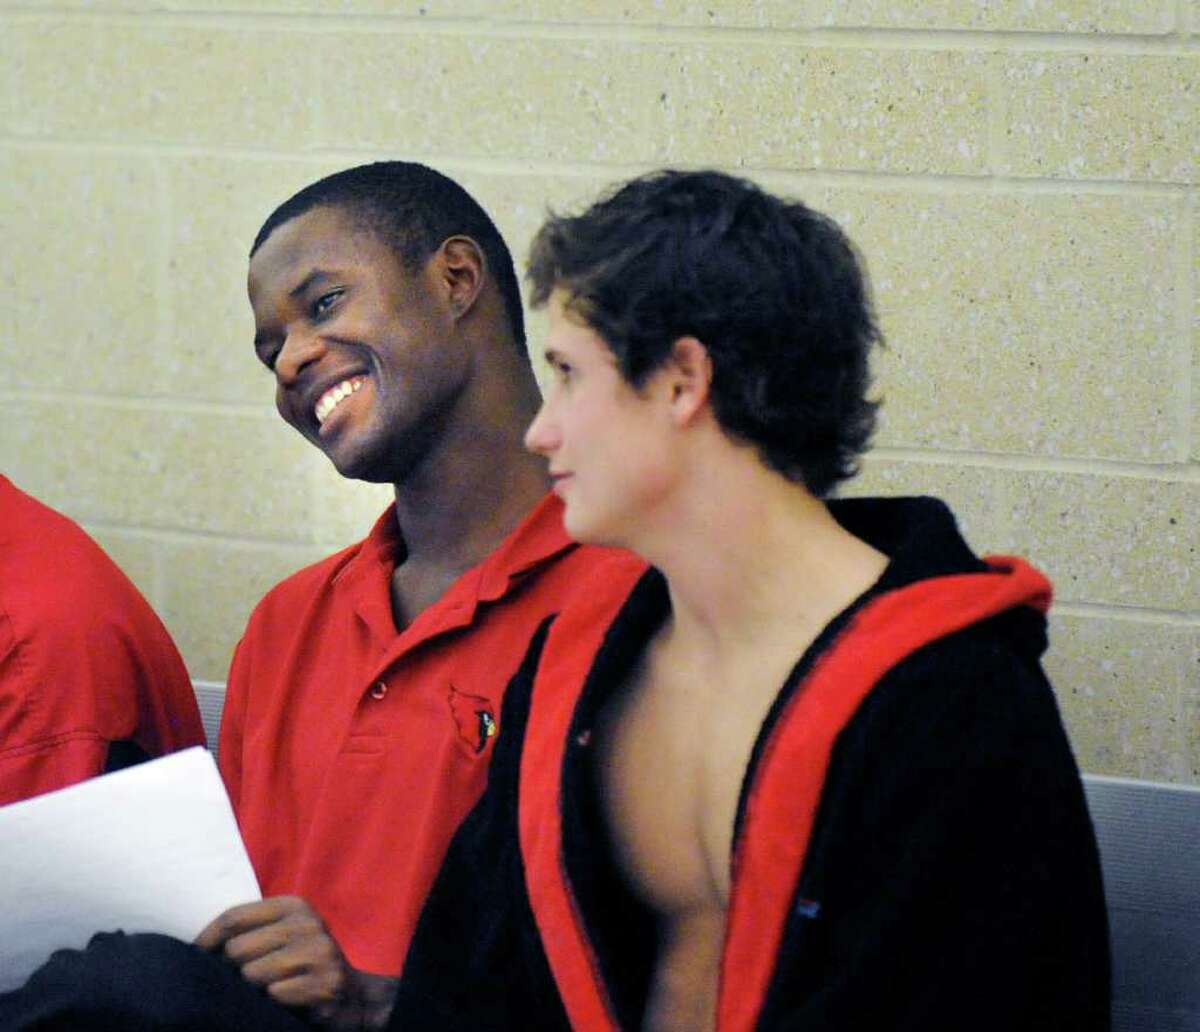 Greenwich HIgh School diving coach Kevin Thompson smiles after speaking with his top diver, Connor Brisson, right, after a Brisson dive during the Class LL Diving Finals at Hamden High School, Thursday, March 10, 2011.